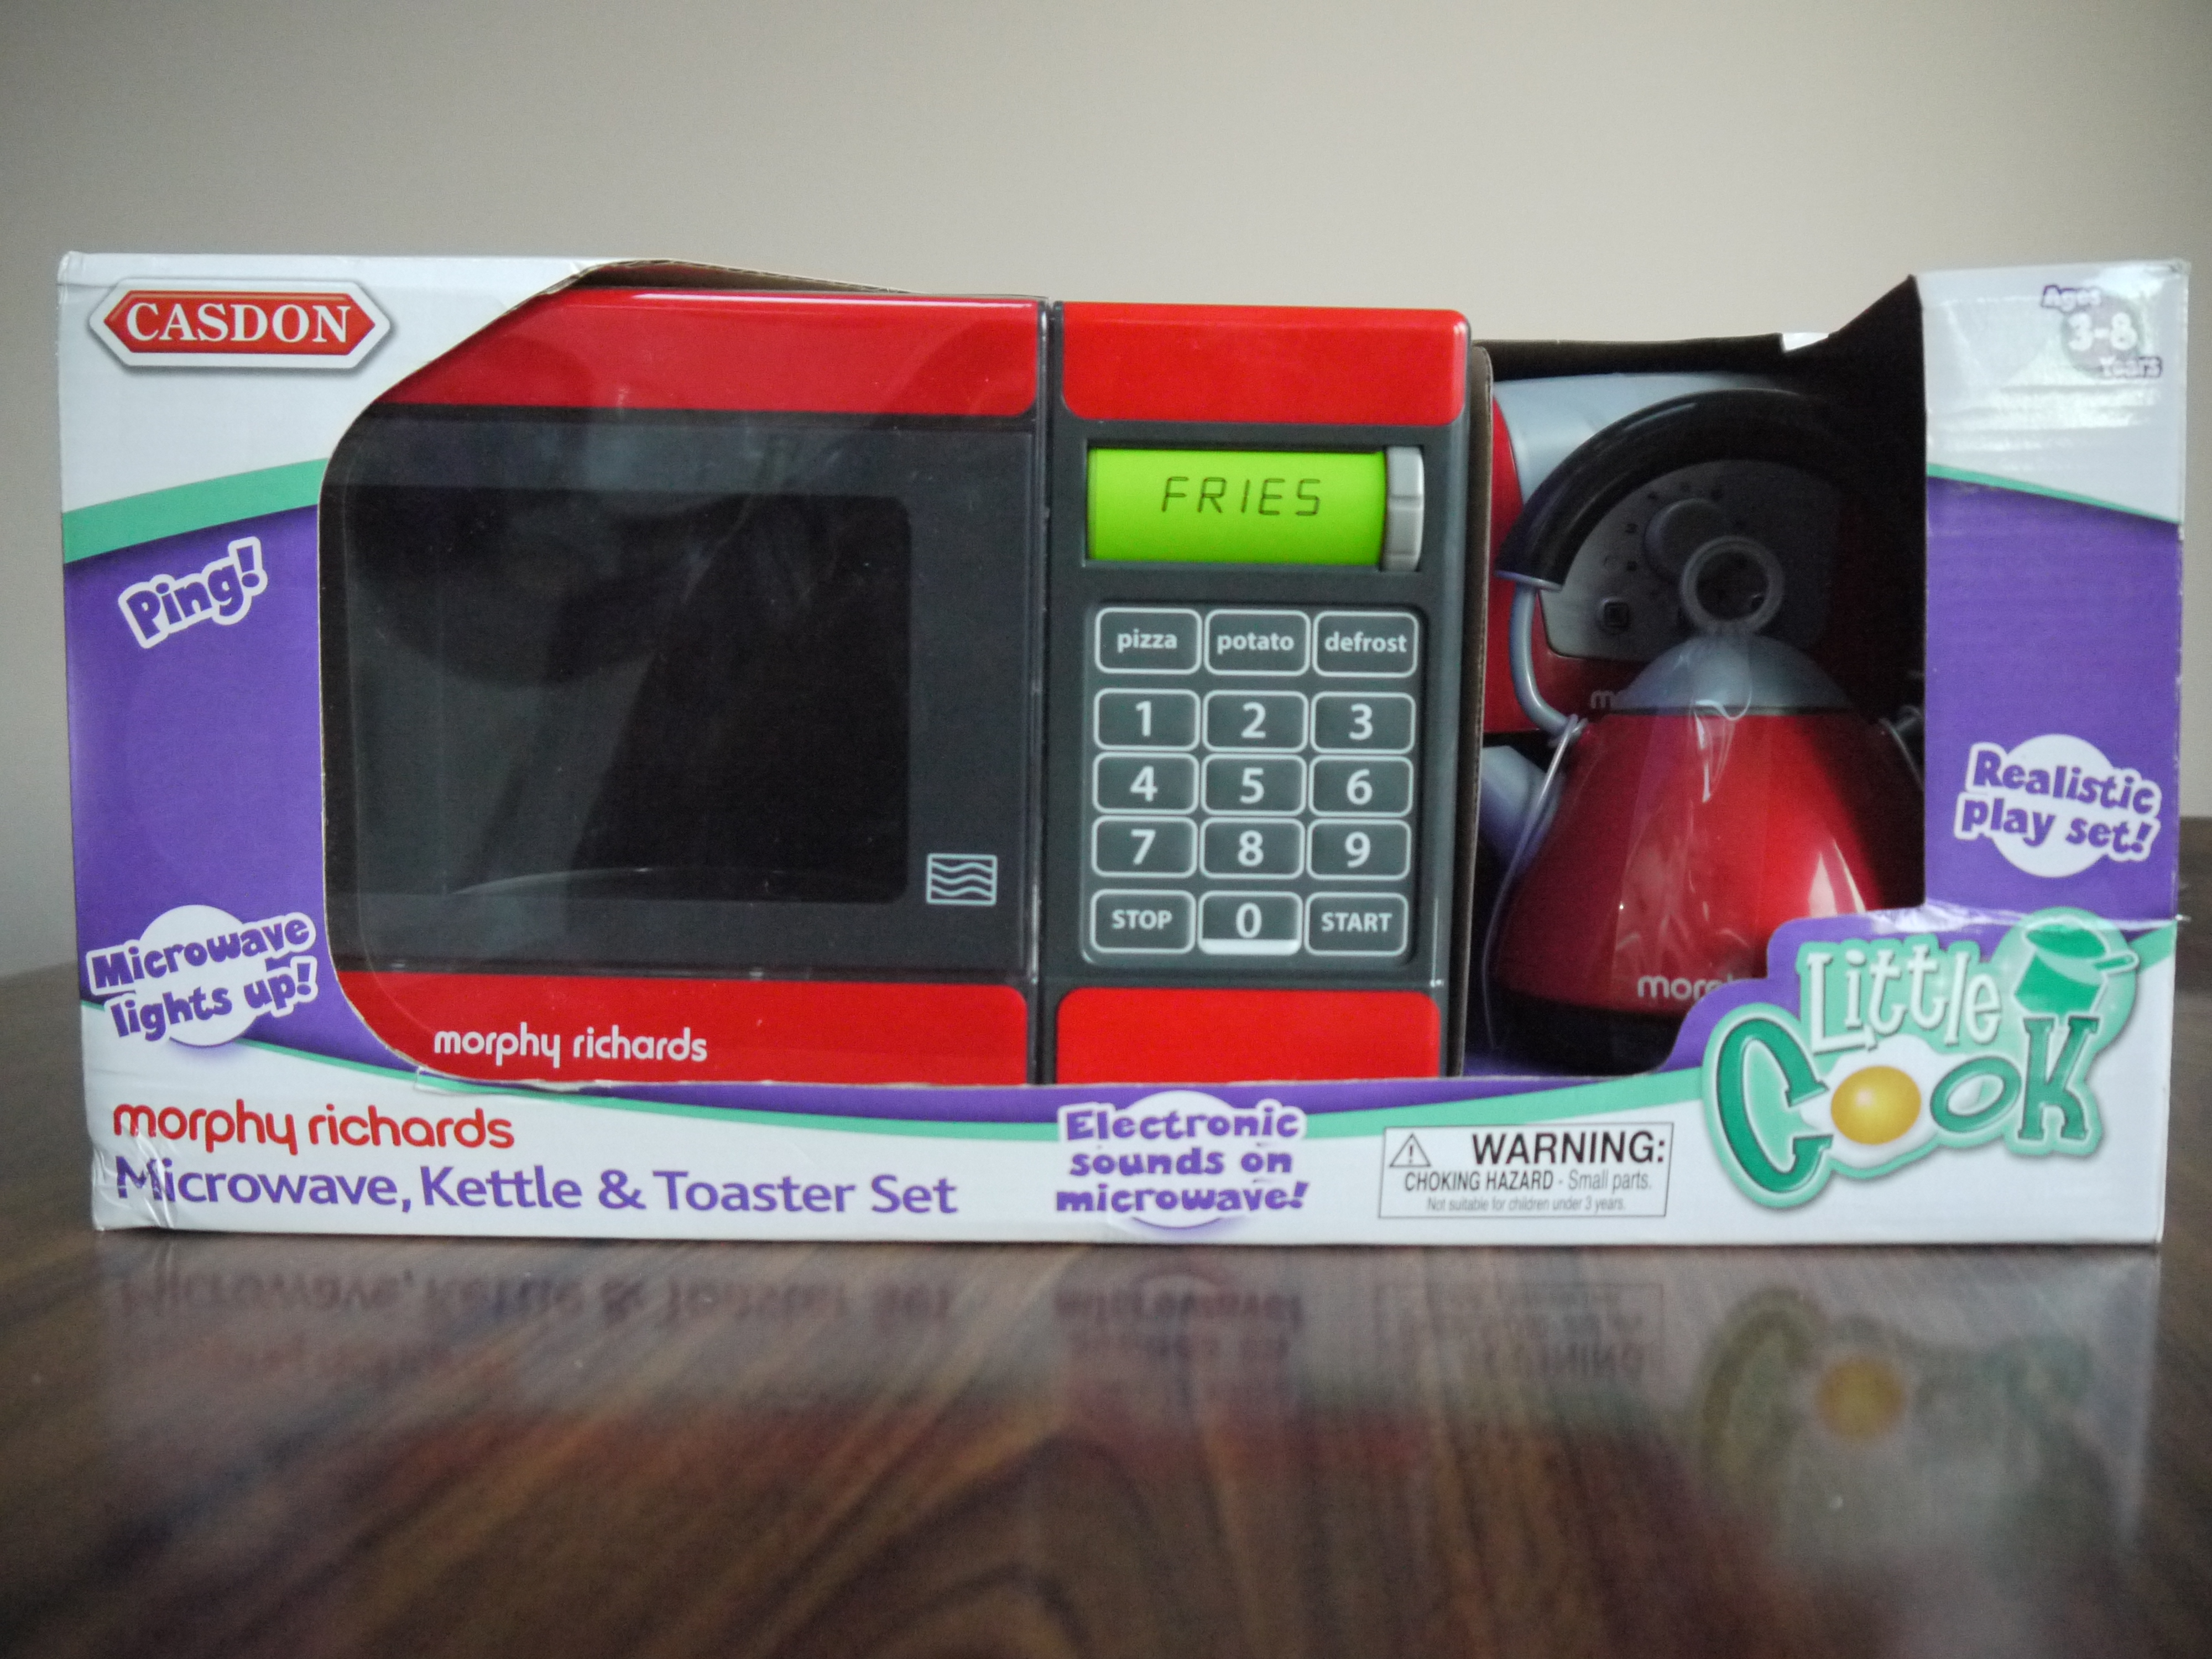 Review – Casdon Kitchen Set (Morphy Richards Microwave, Kettle and Toaster)